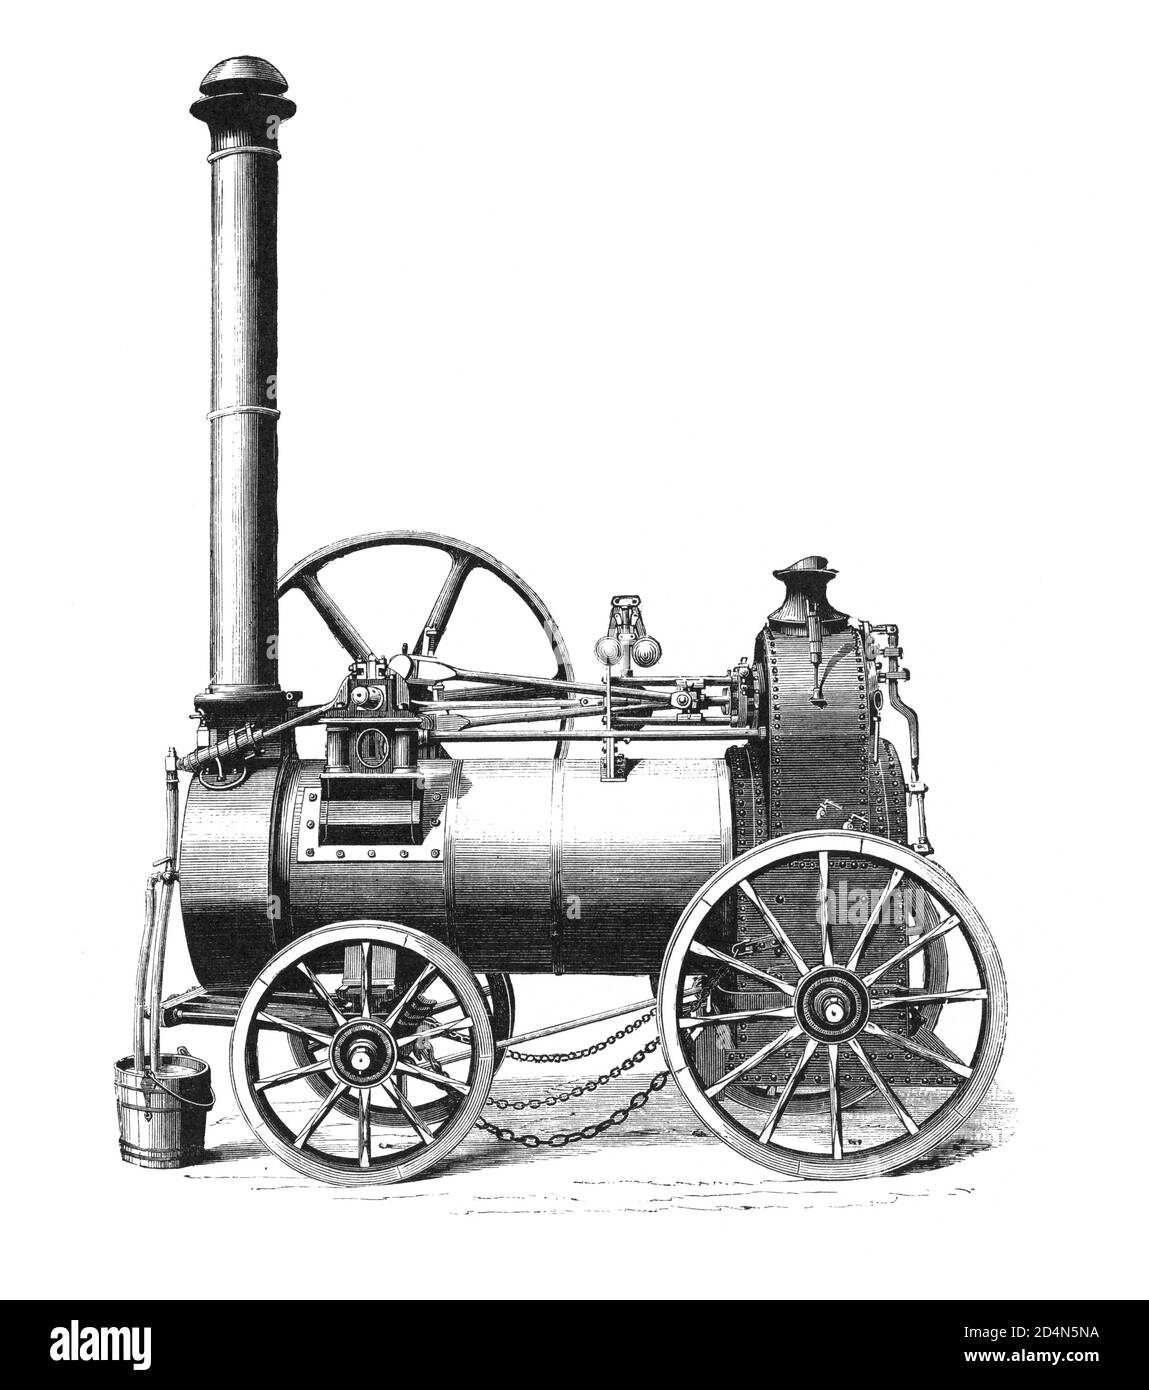 Early illustration of a steam engine from a 1871 book Stock Photo